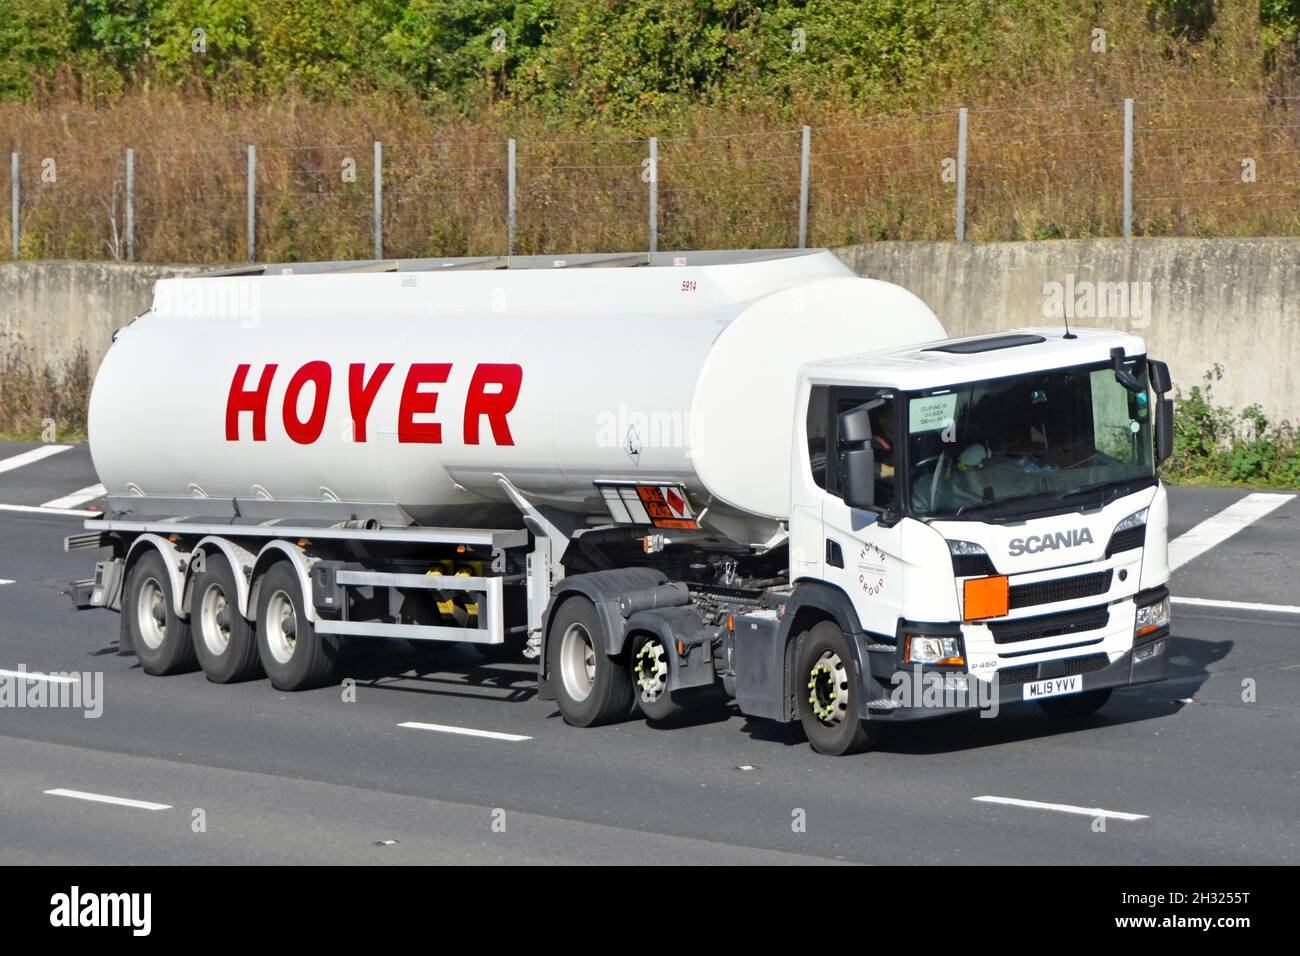 Side & front view Hoyer business in bulk logistics for petroleum chemical industry hgv lorry truck brand logo on tanker trailer driving on UK motorway Stock Photo